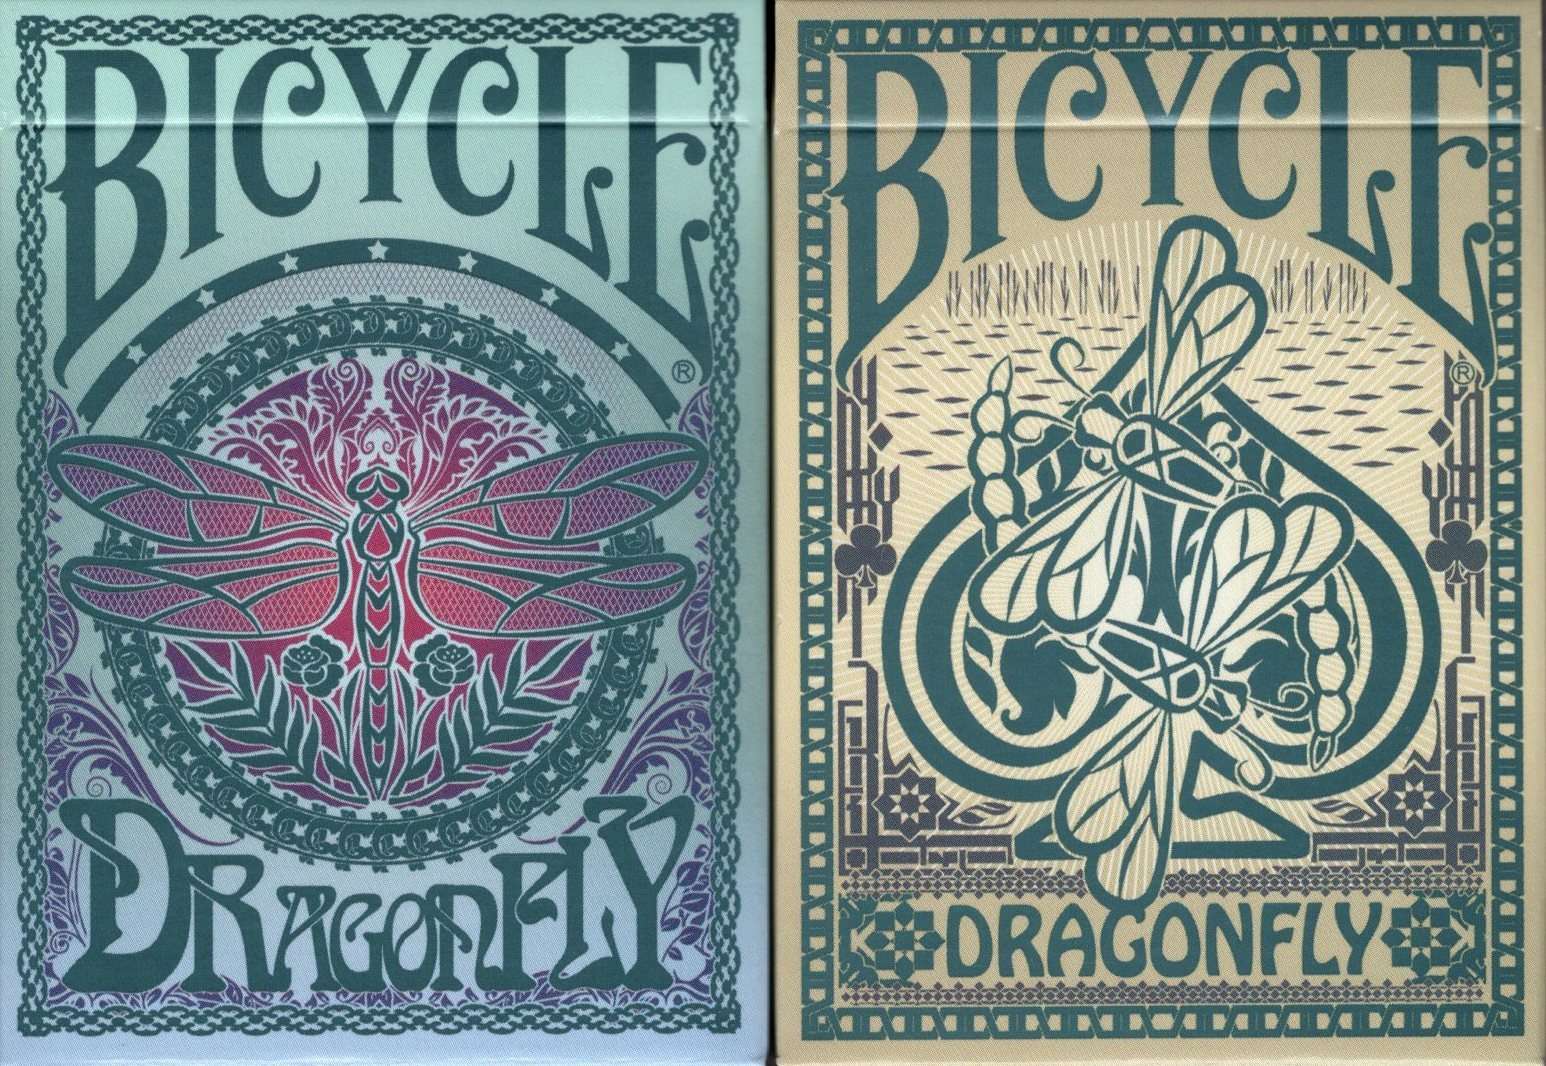 PlayingCardDecks.com-Dragonfly Bicycle Playing Cards: 2 Deck Set